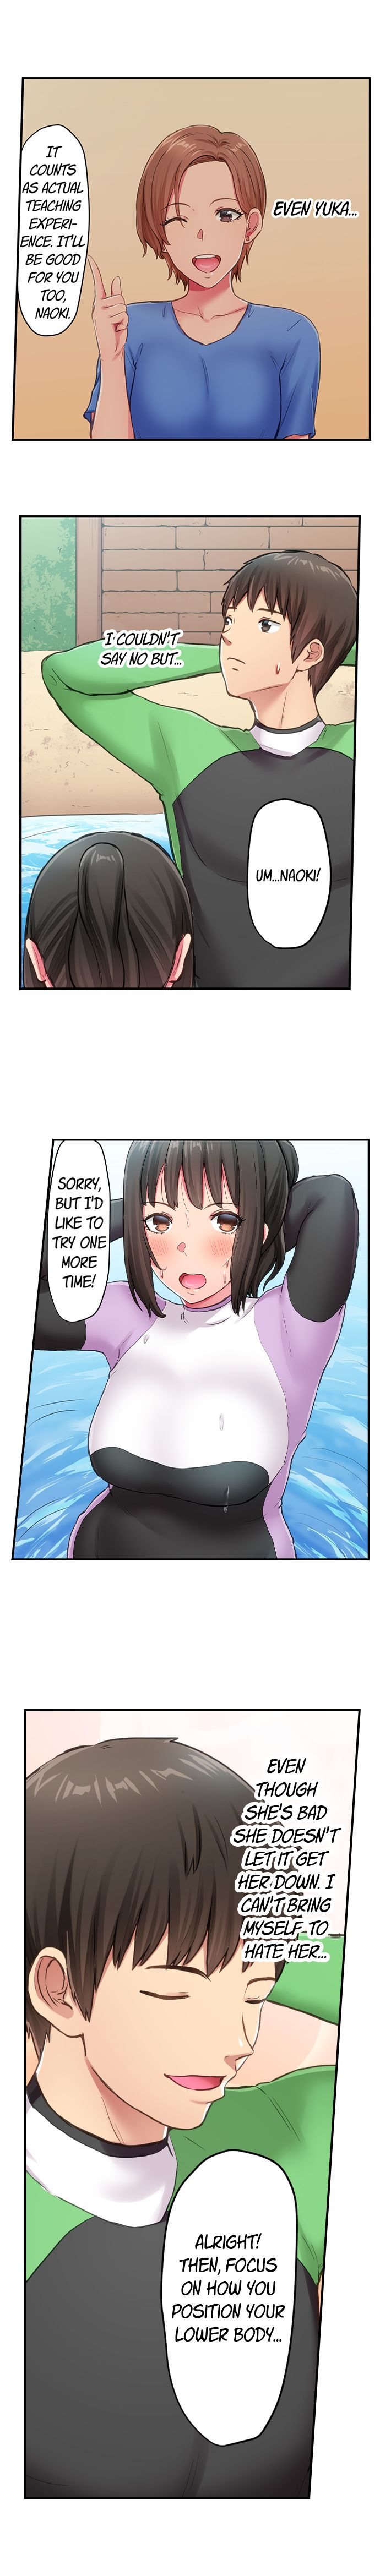 Blooming Summer Making Her Cum in Her Tight Wetsuit - Chapter 1 Page 9